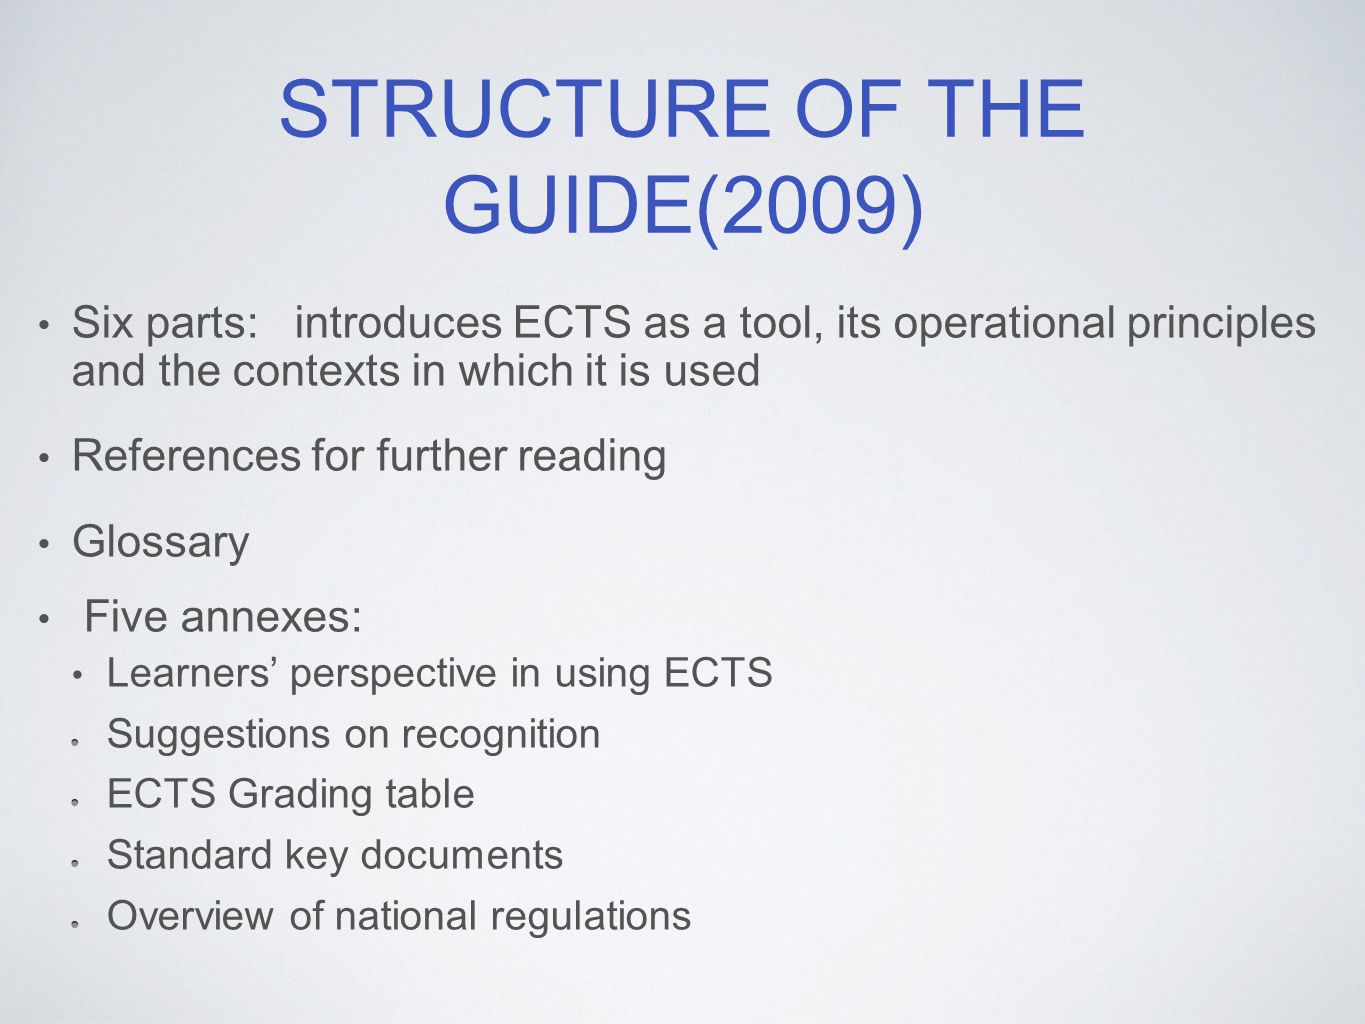 STRUCTURE OF THE GUIDE(2009) Six parts: introduces ECTS as a tool, its operational principles and the contexts in which it is used References for further reading Glossary Five annexes: Learners’ perspective in using ECTS Suggestions on recognition ECTS Grading table Standard key documents Overview of national regulations